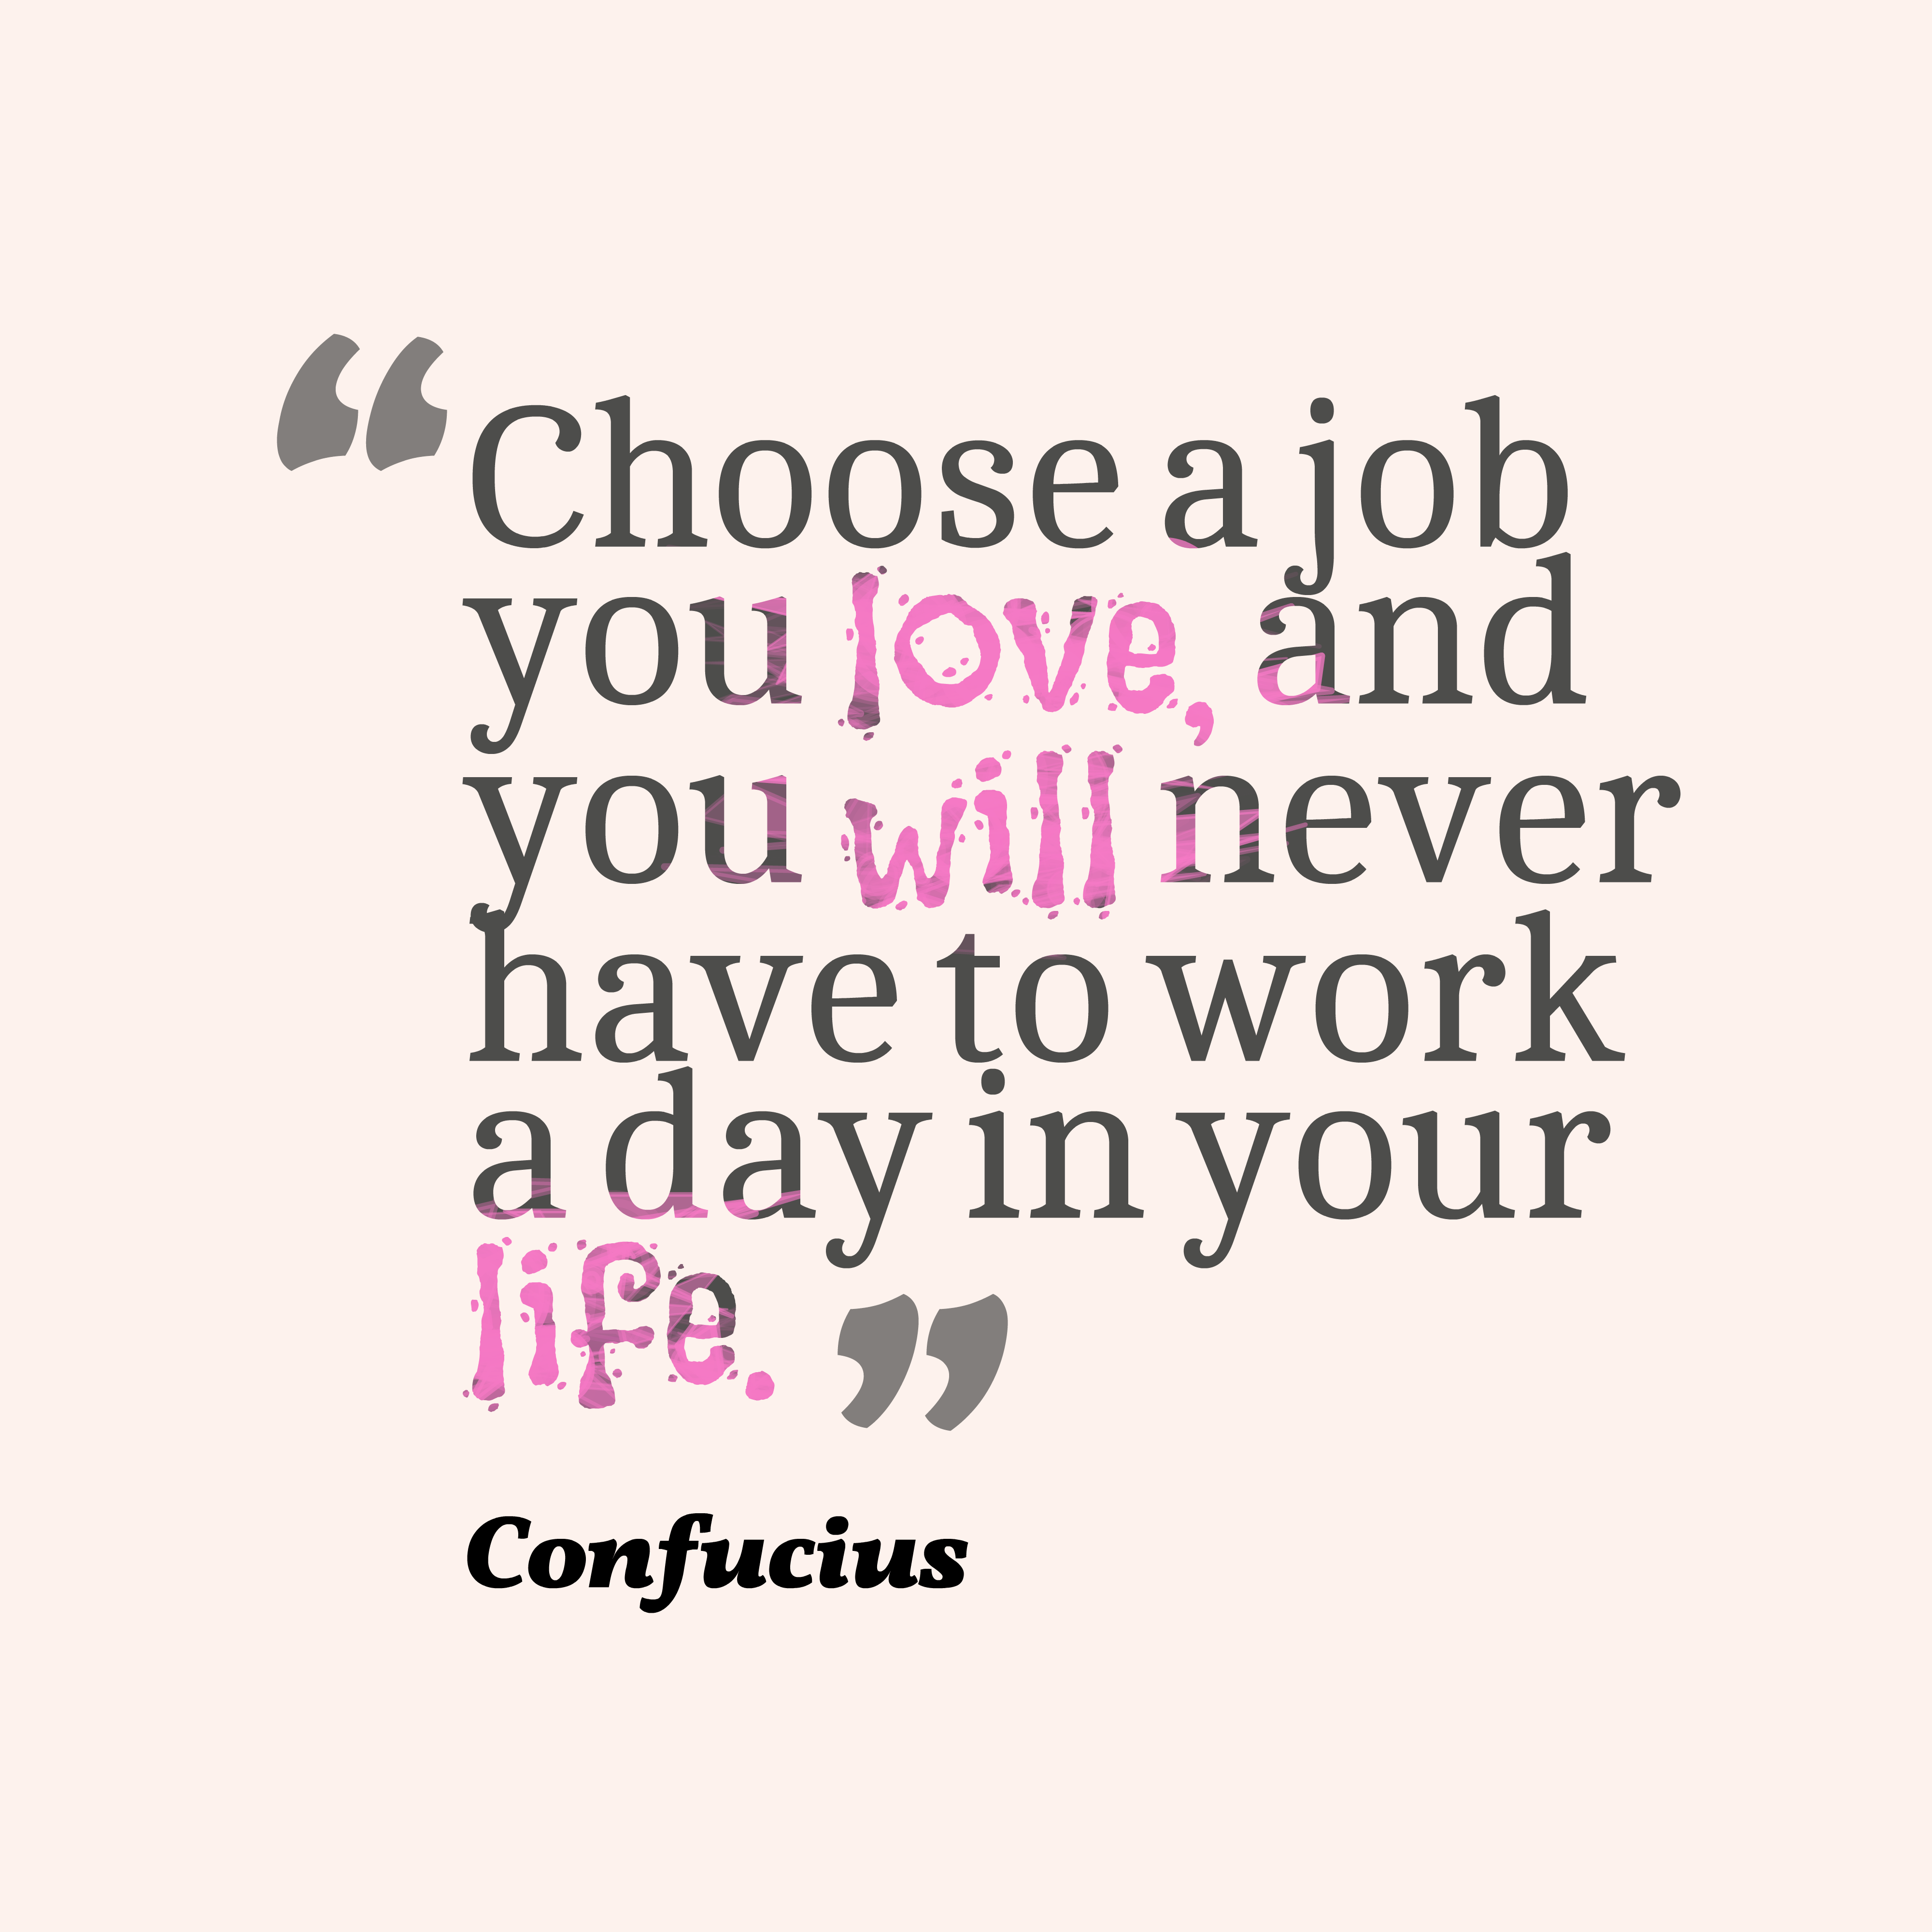 Choose a job you love and you will never have to work a day in your life – Confucius